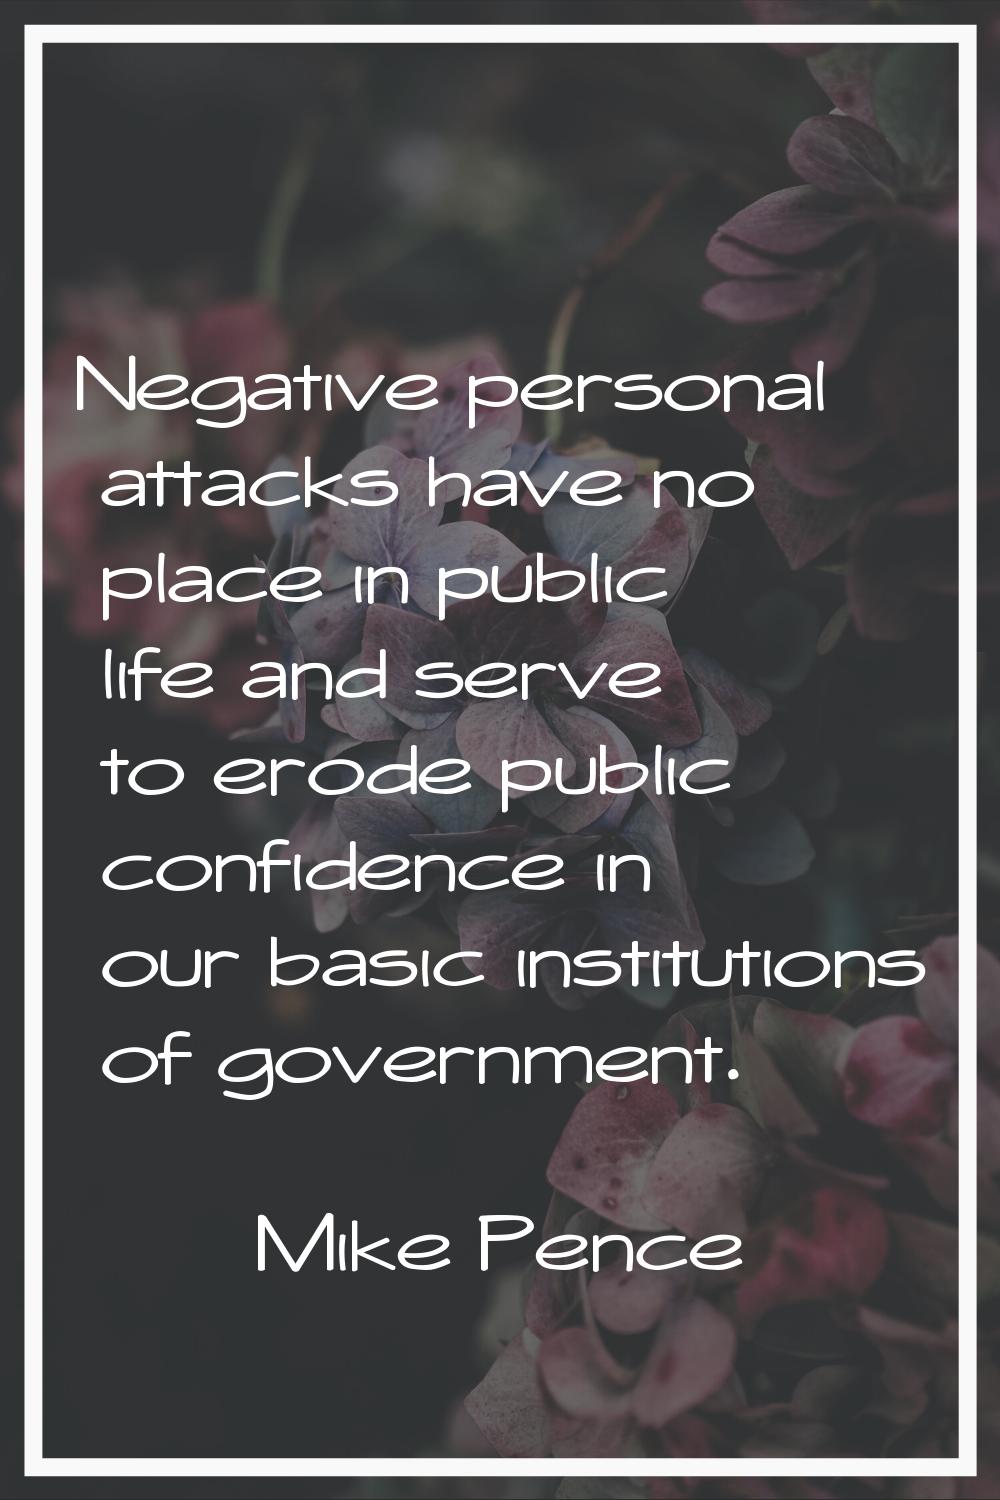 Negative personal attacks have no place in public life and serve to erode public confidence in our 